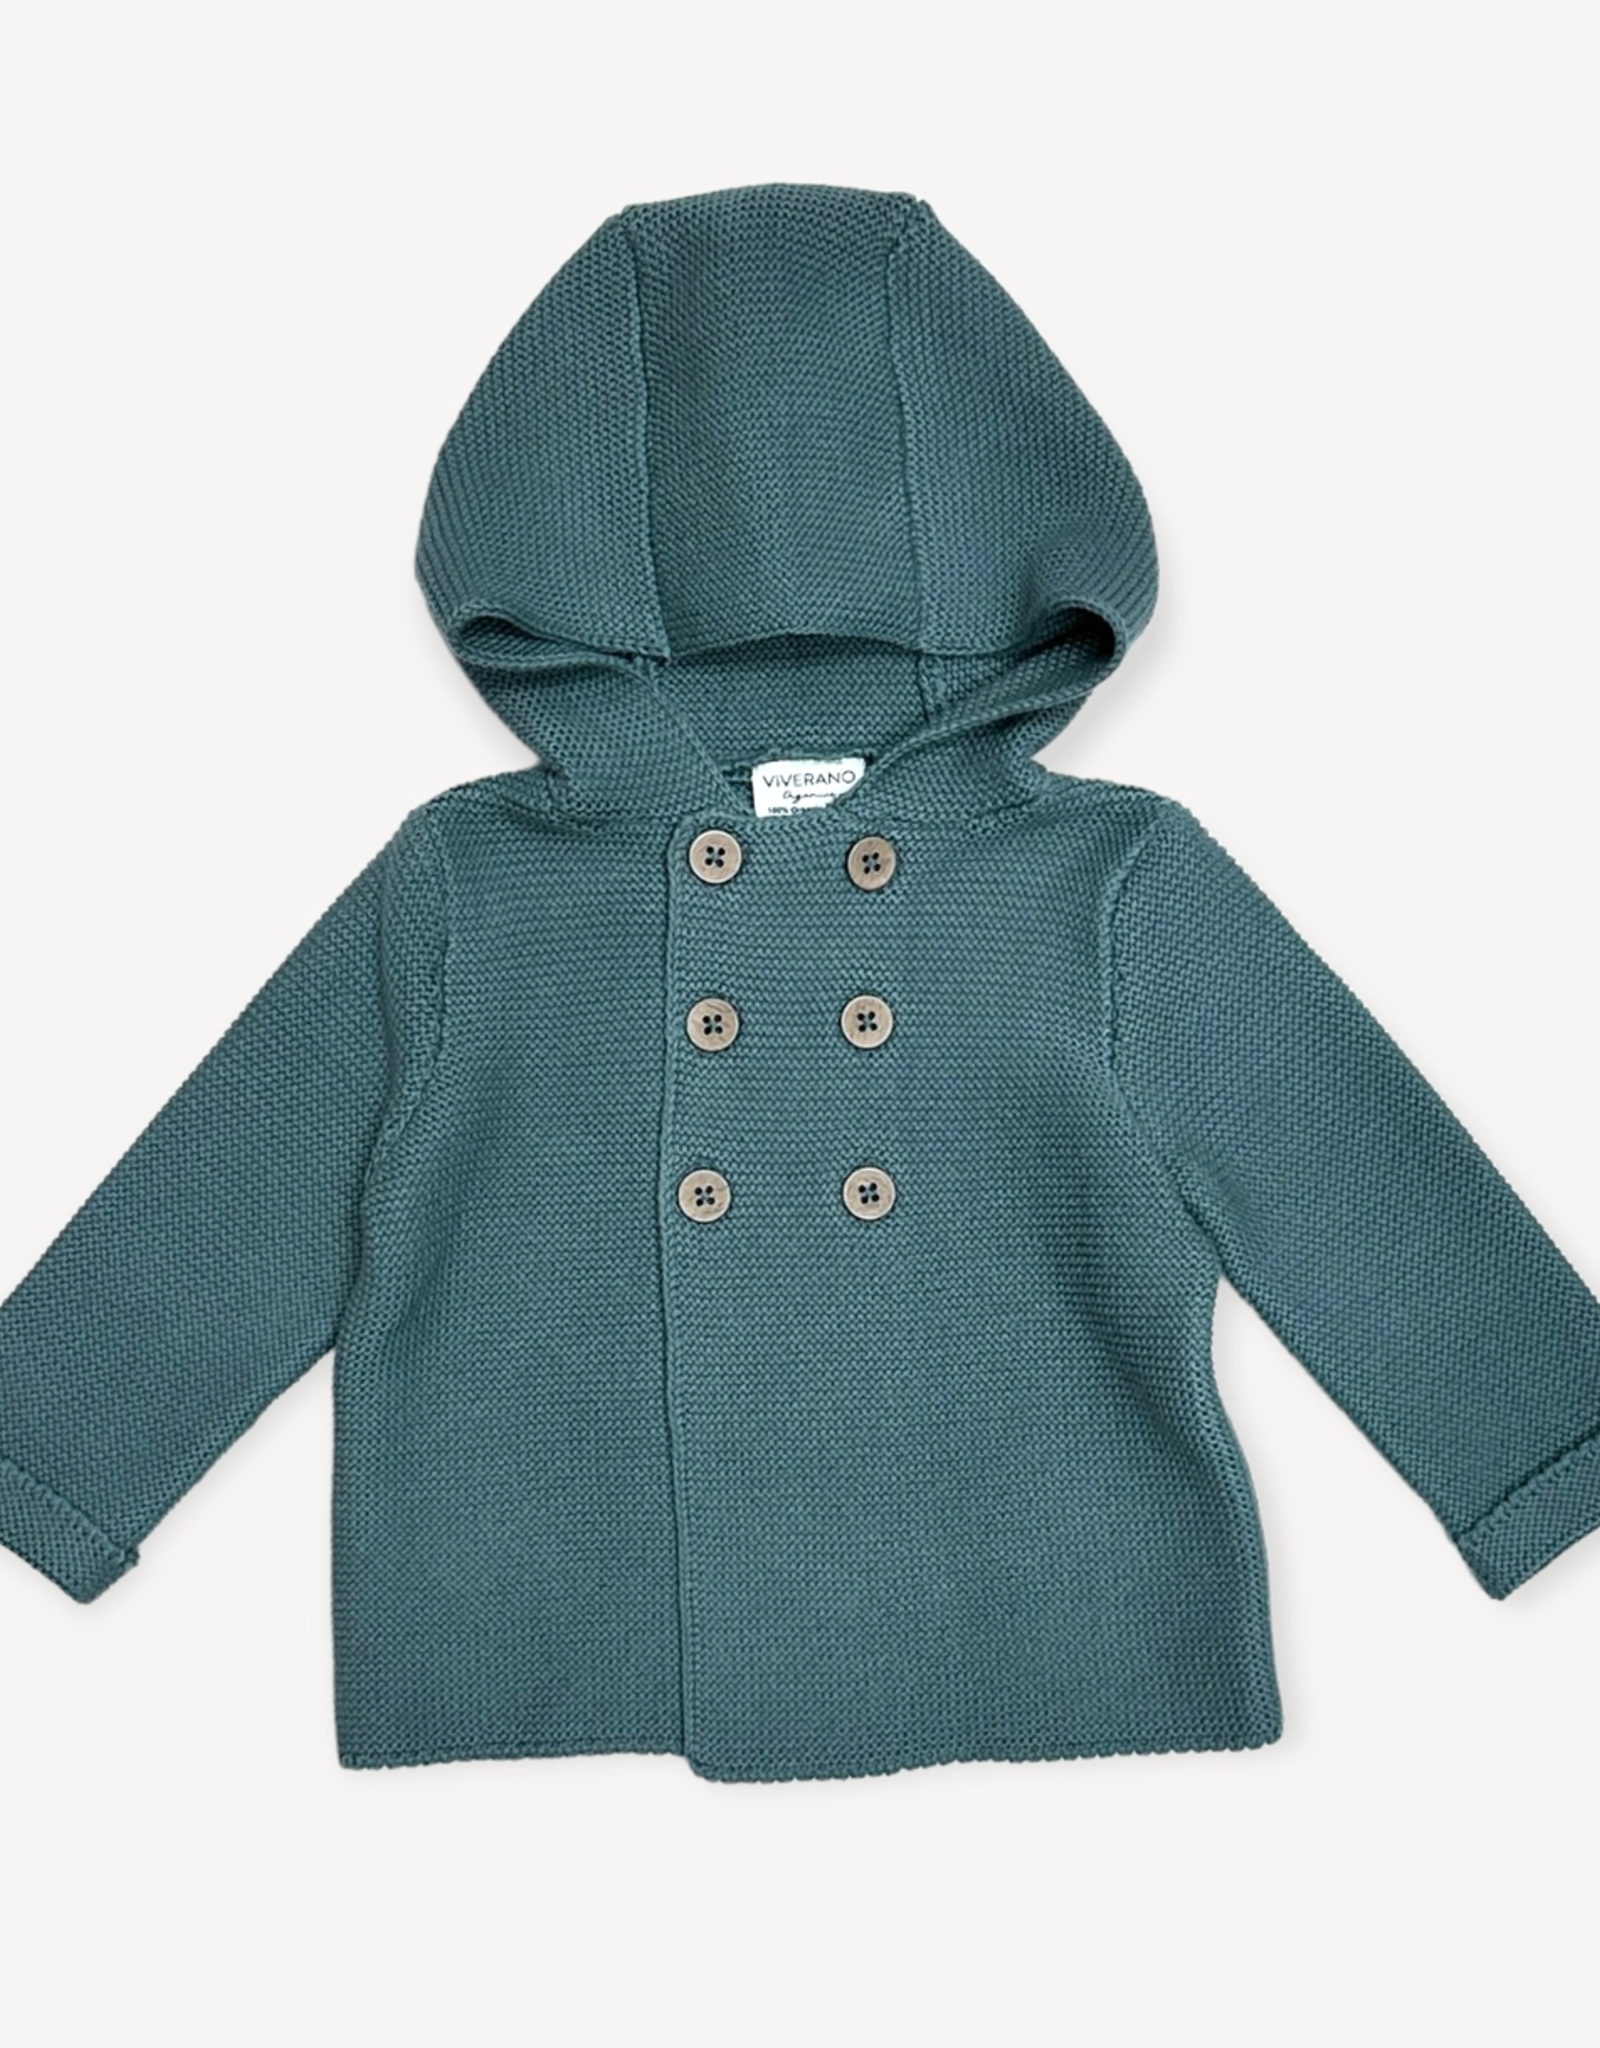 Viverano Hooded Double Button Coat Jacket - Teal Blue